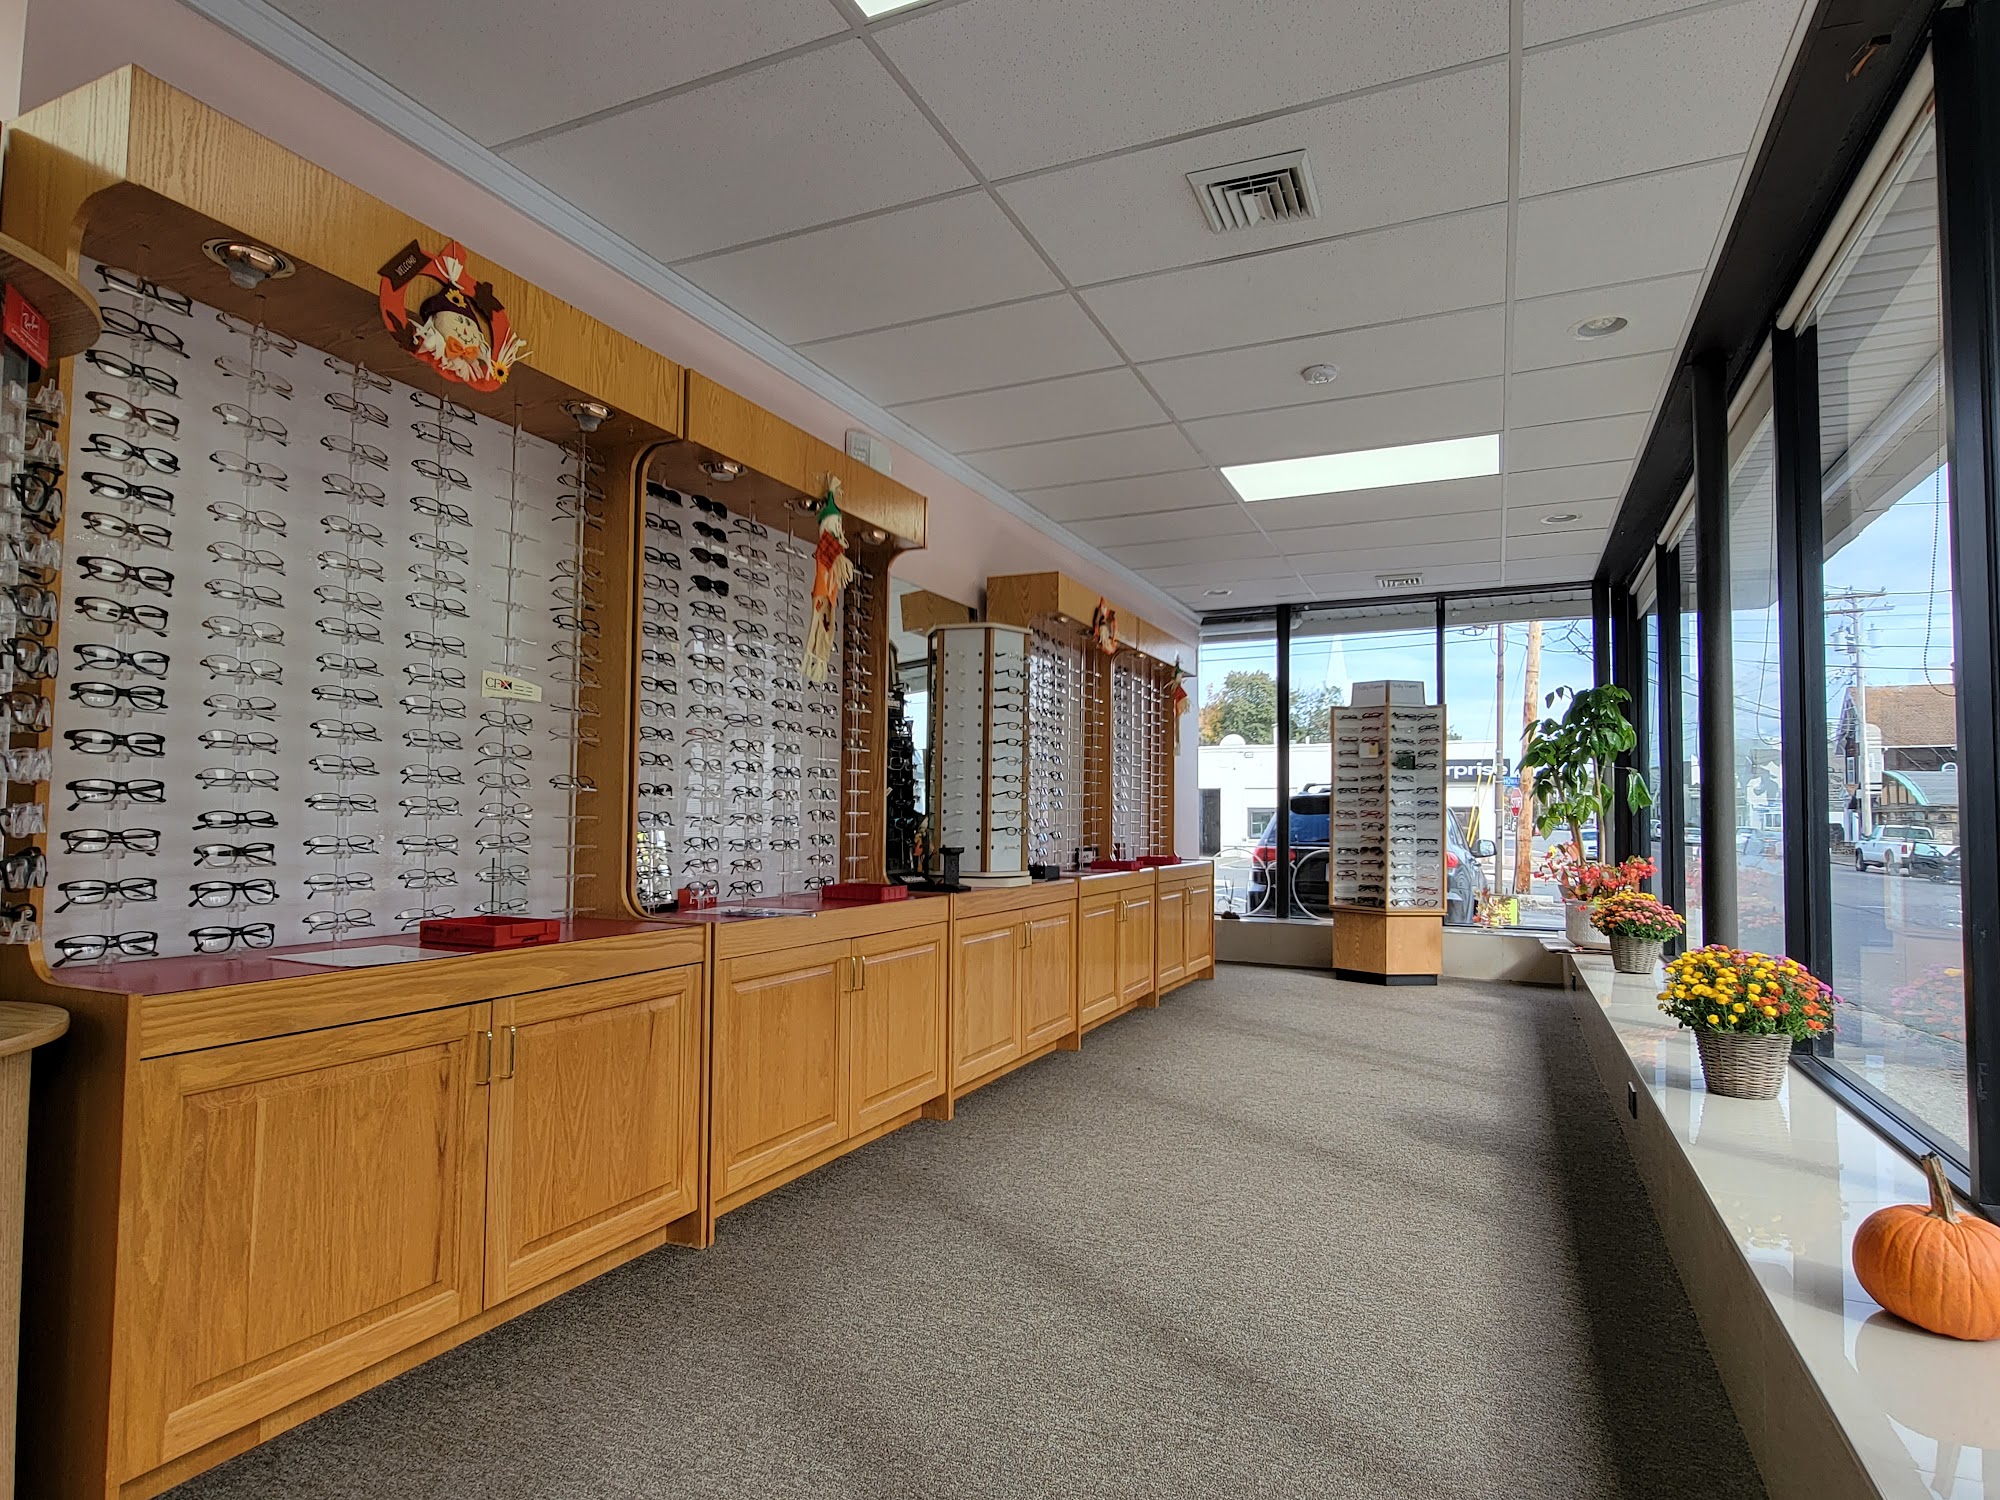 New Insight Family Eyecare Ansonia 3 Clifton Ave, Ansonia Connecticut 06401